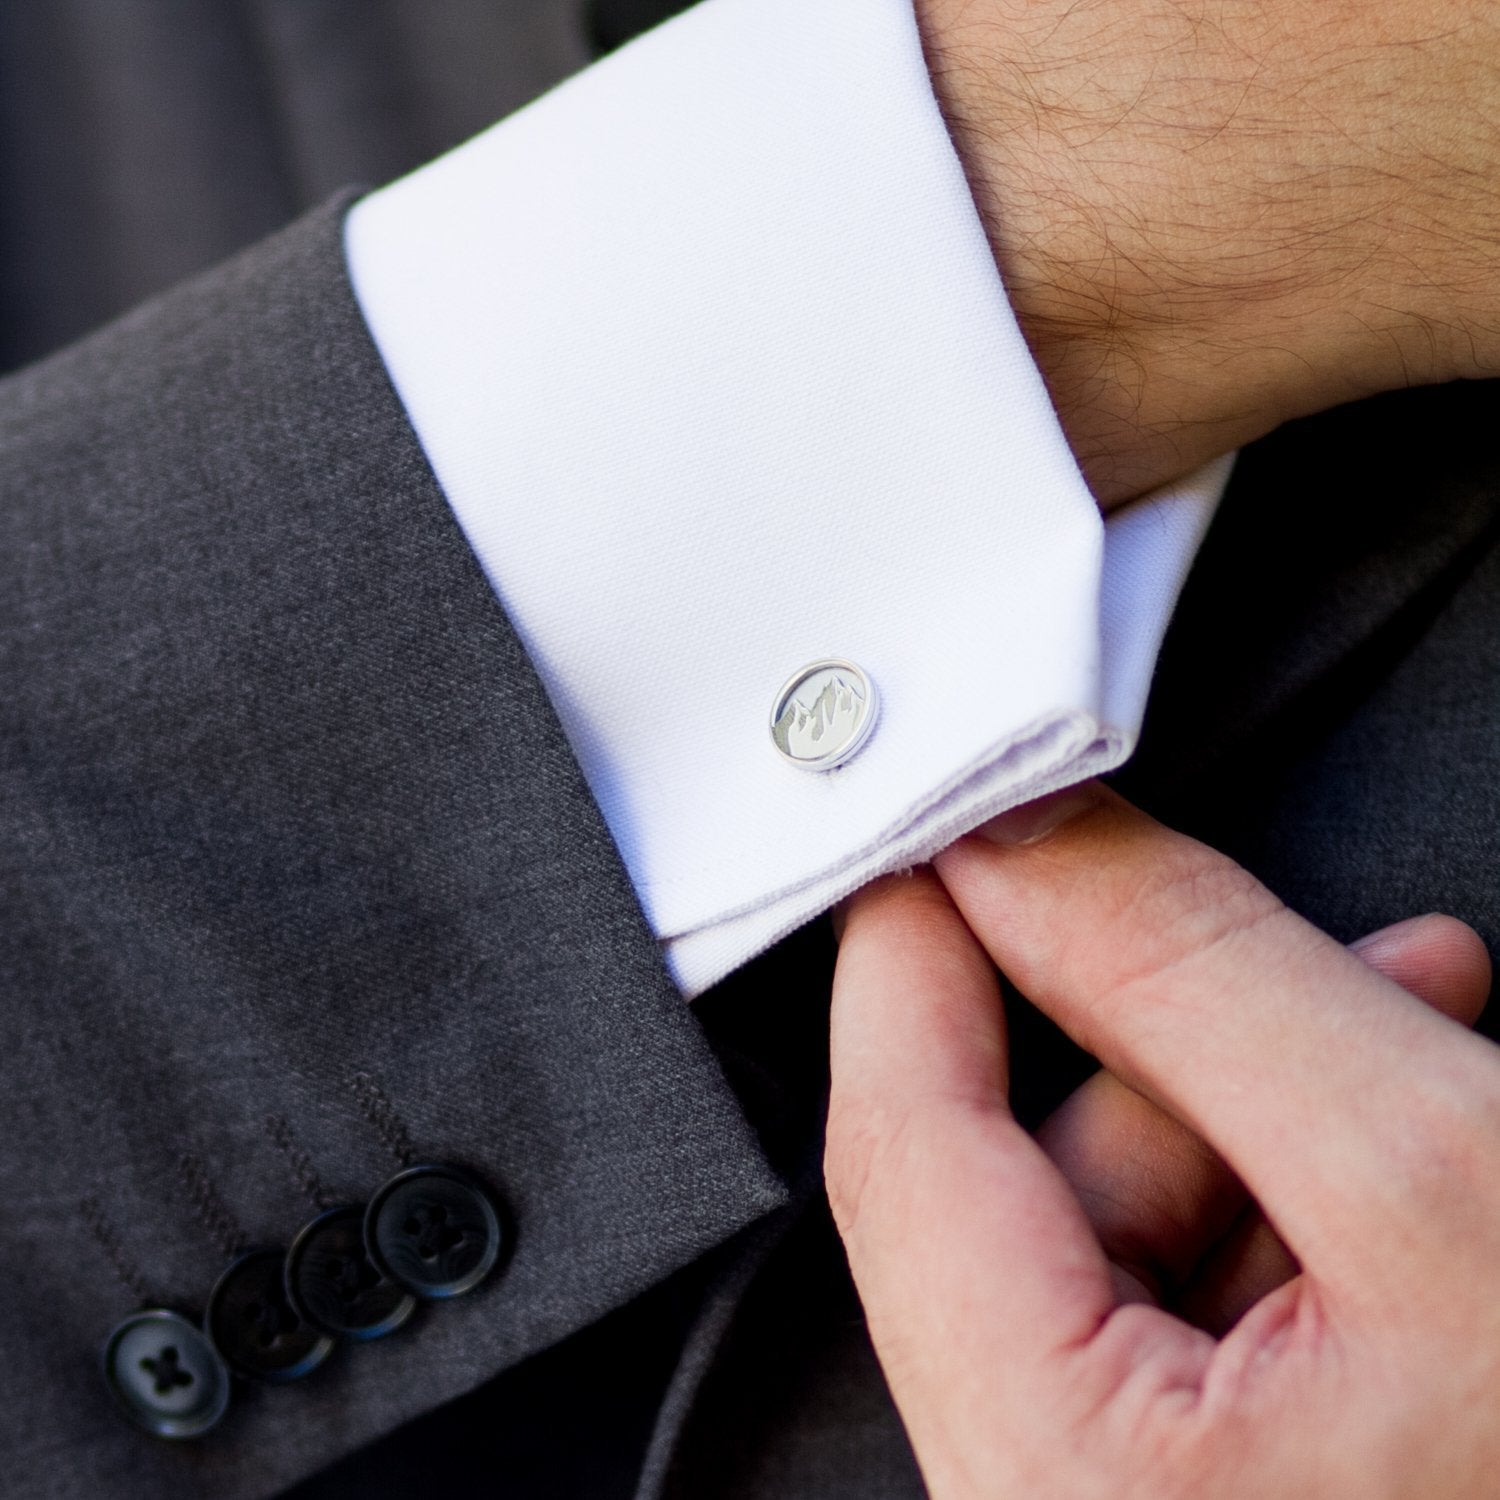 Image shows a person in a grey suit with a white shirt adjusting their shirt cuffs and showing a pair of stainless steel round cufflinks with mountains engraved into their surface.